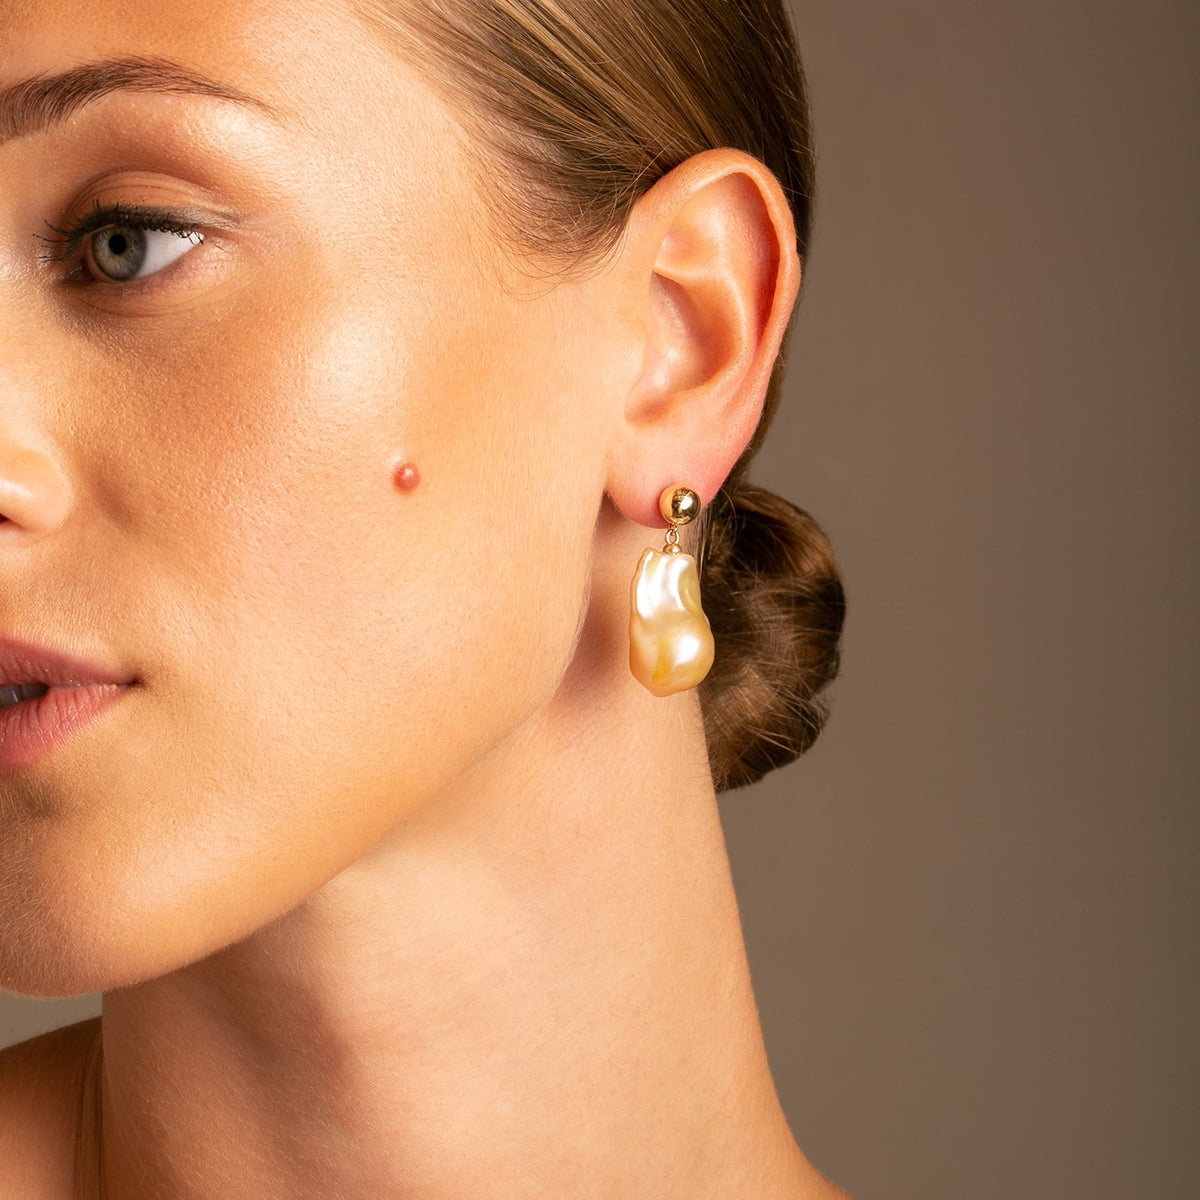 Featuring a sleek 7.5mm hollow 14k Yellow Gold ball with a glossy finish, this Double Bubble Design is adorned with a captivating golden-hued baroque pearl drop . On model photo